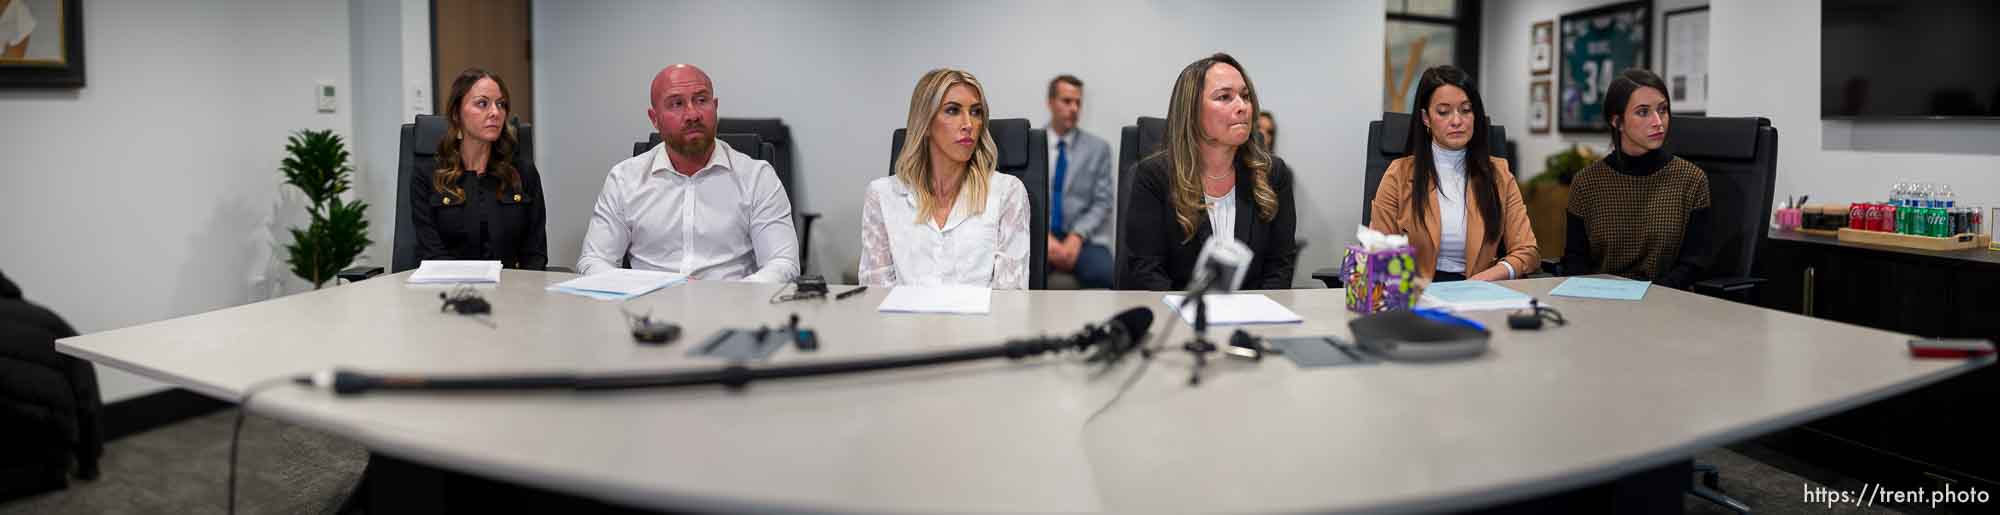 (Trent Nelson  |  The Salt Lake Tribune) Women who are accusing Tim Ballard of sexual misconduct speak at a news conference in Salt Lake City on Tuesday, Nov. 21, 2023. From left are Celeste Borys, Mike Borys, Kira Lynch, Jordana (Bree) Righter, Sashleigha (Sasha) Hightower and Mary Hall.